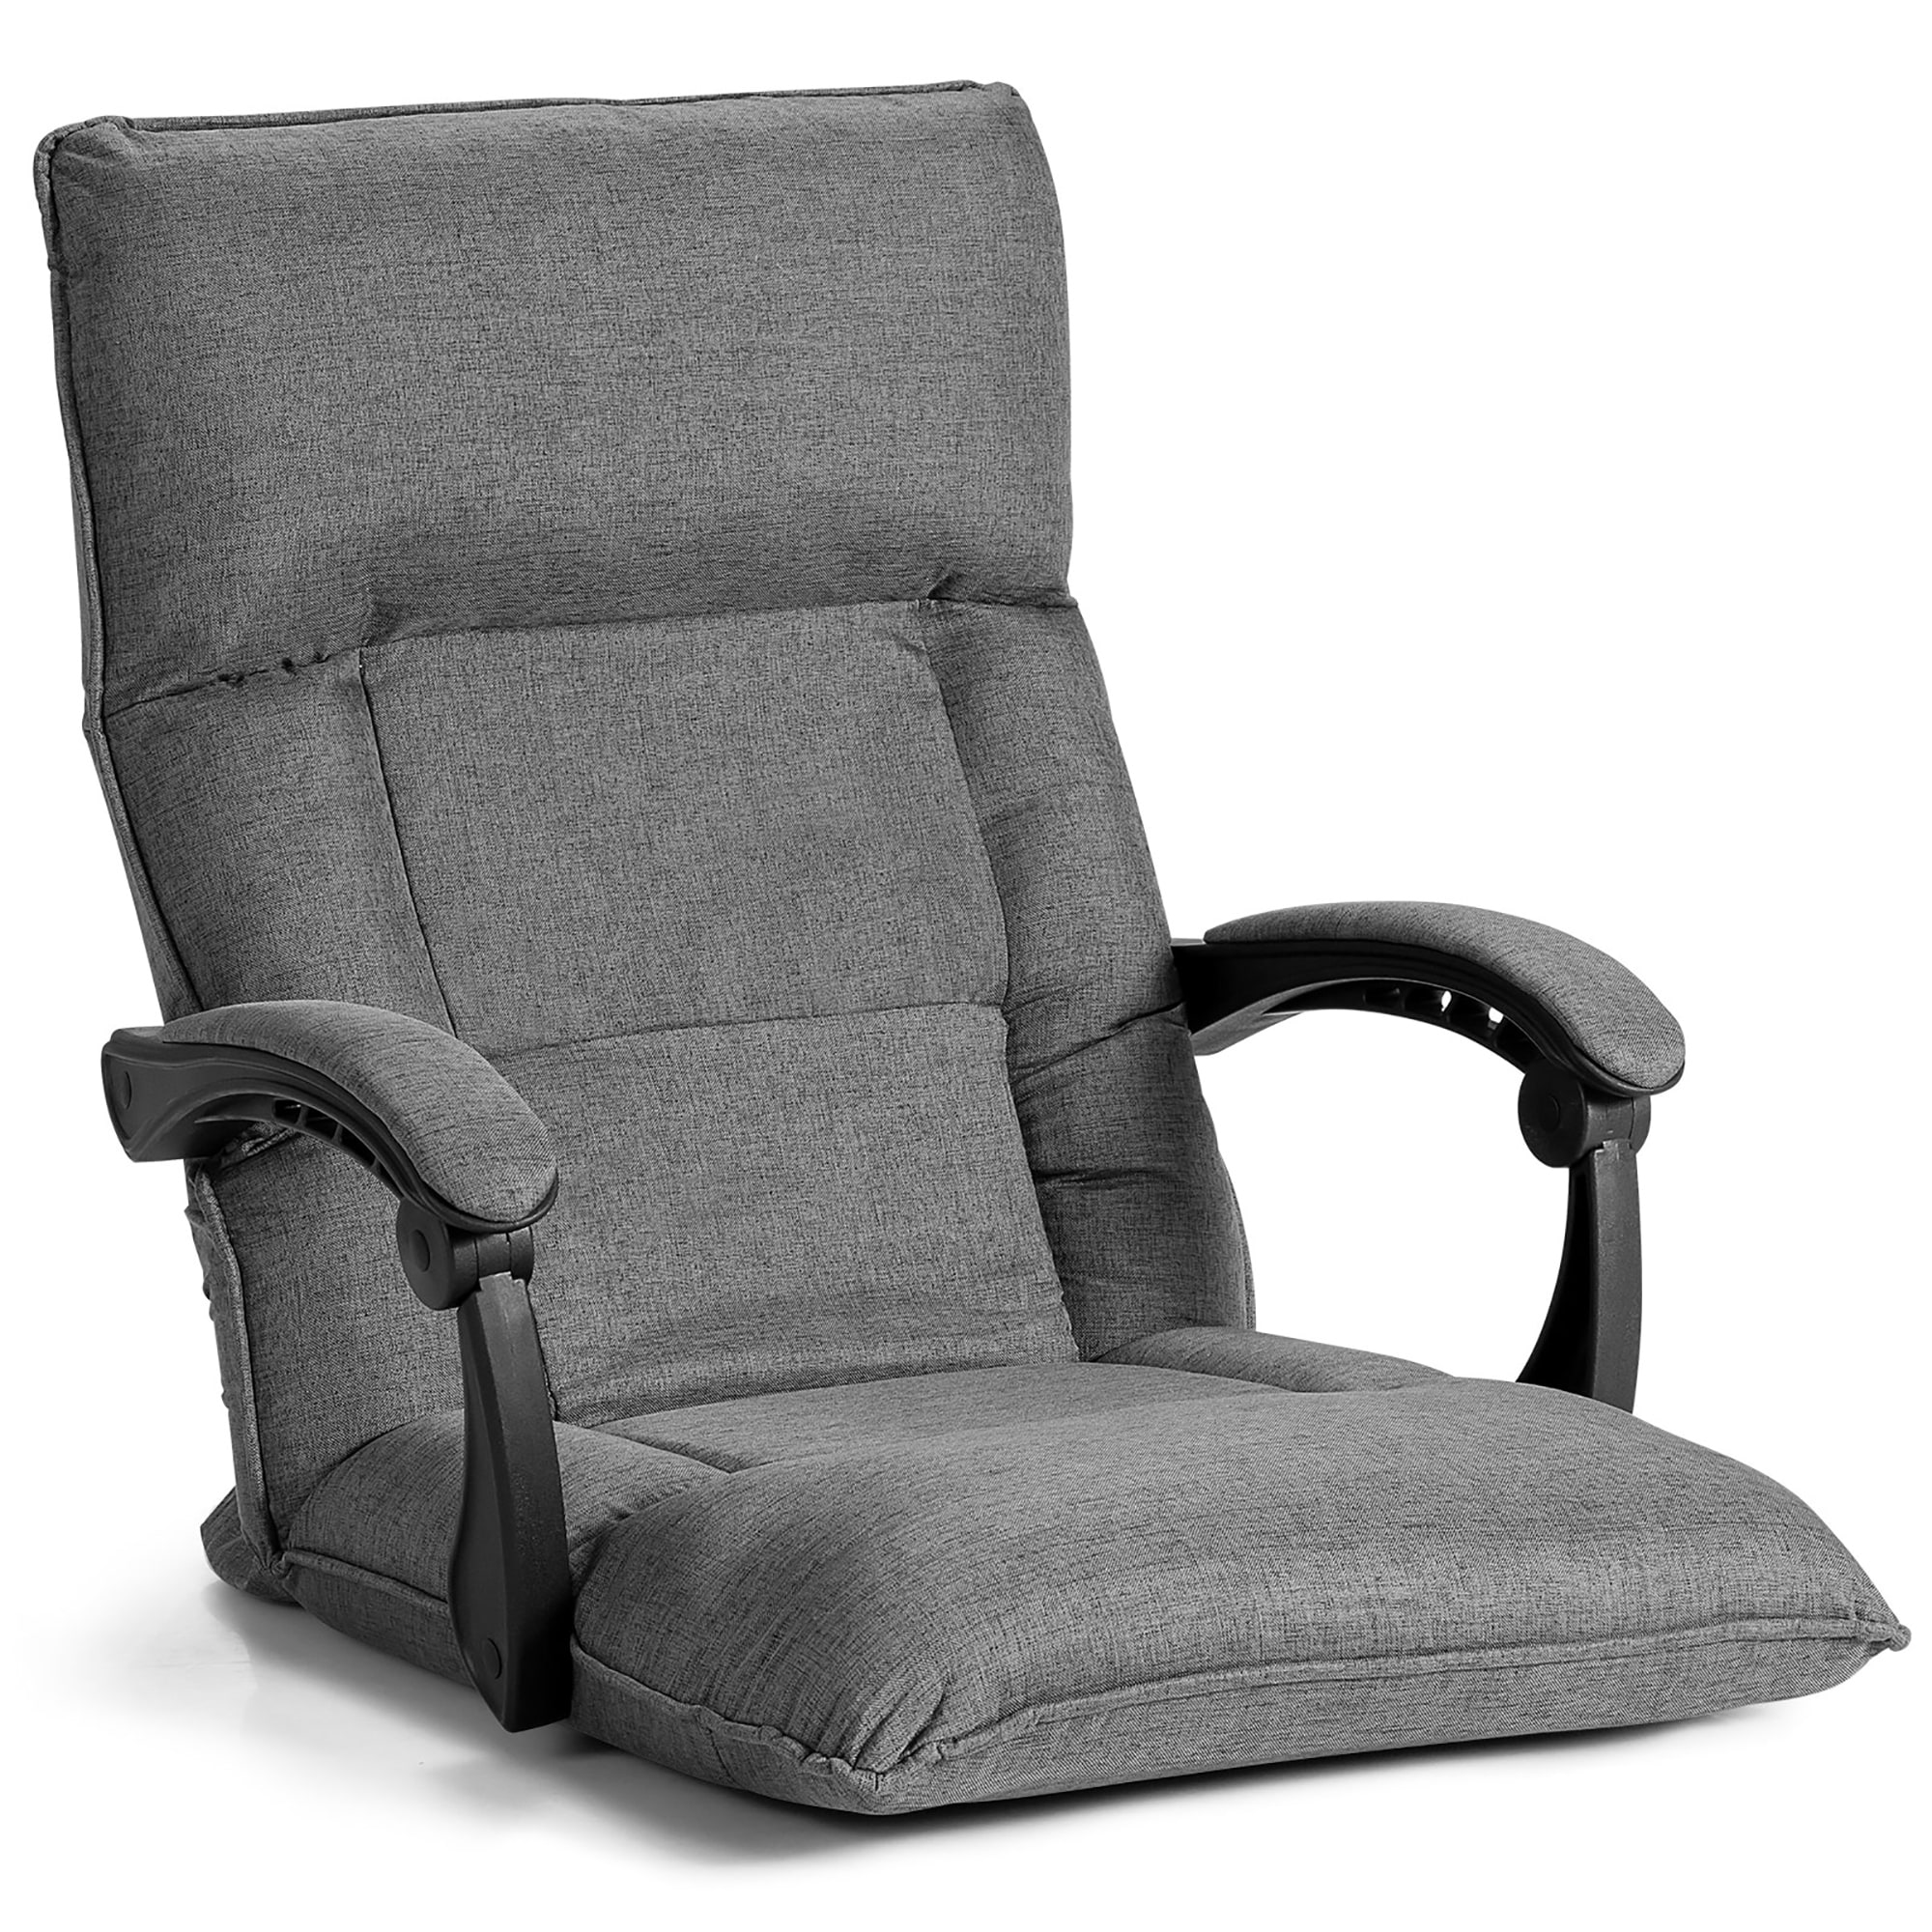 Costway 14-Position Floor Chair Lazy Sofa w/Adjustable Back Headrest - See details